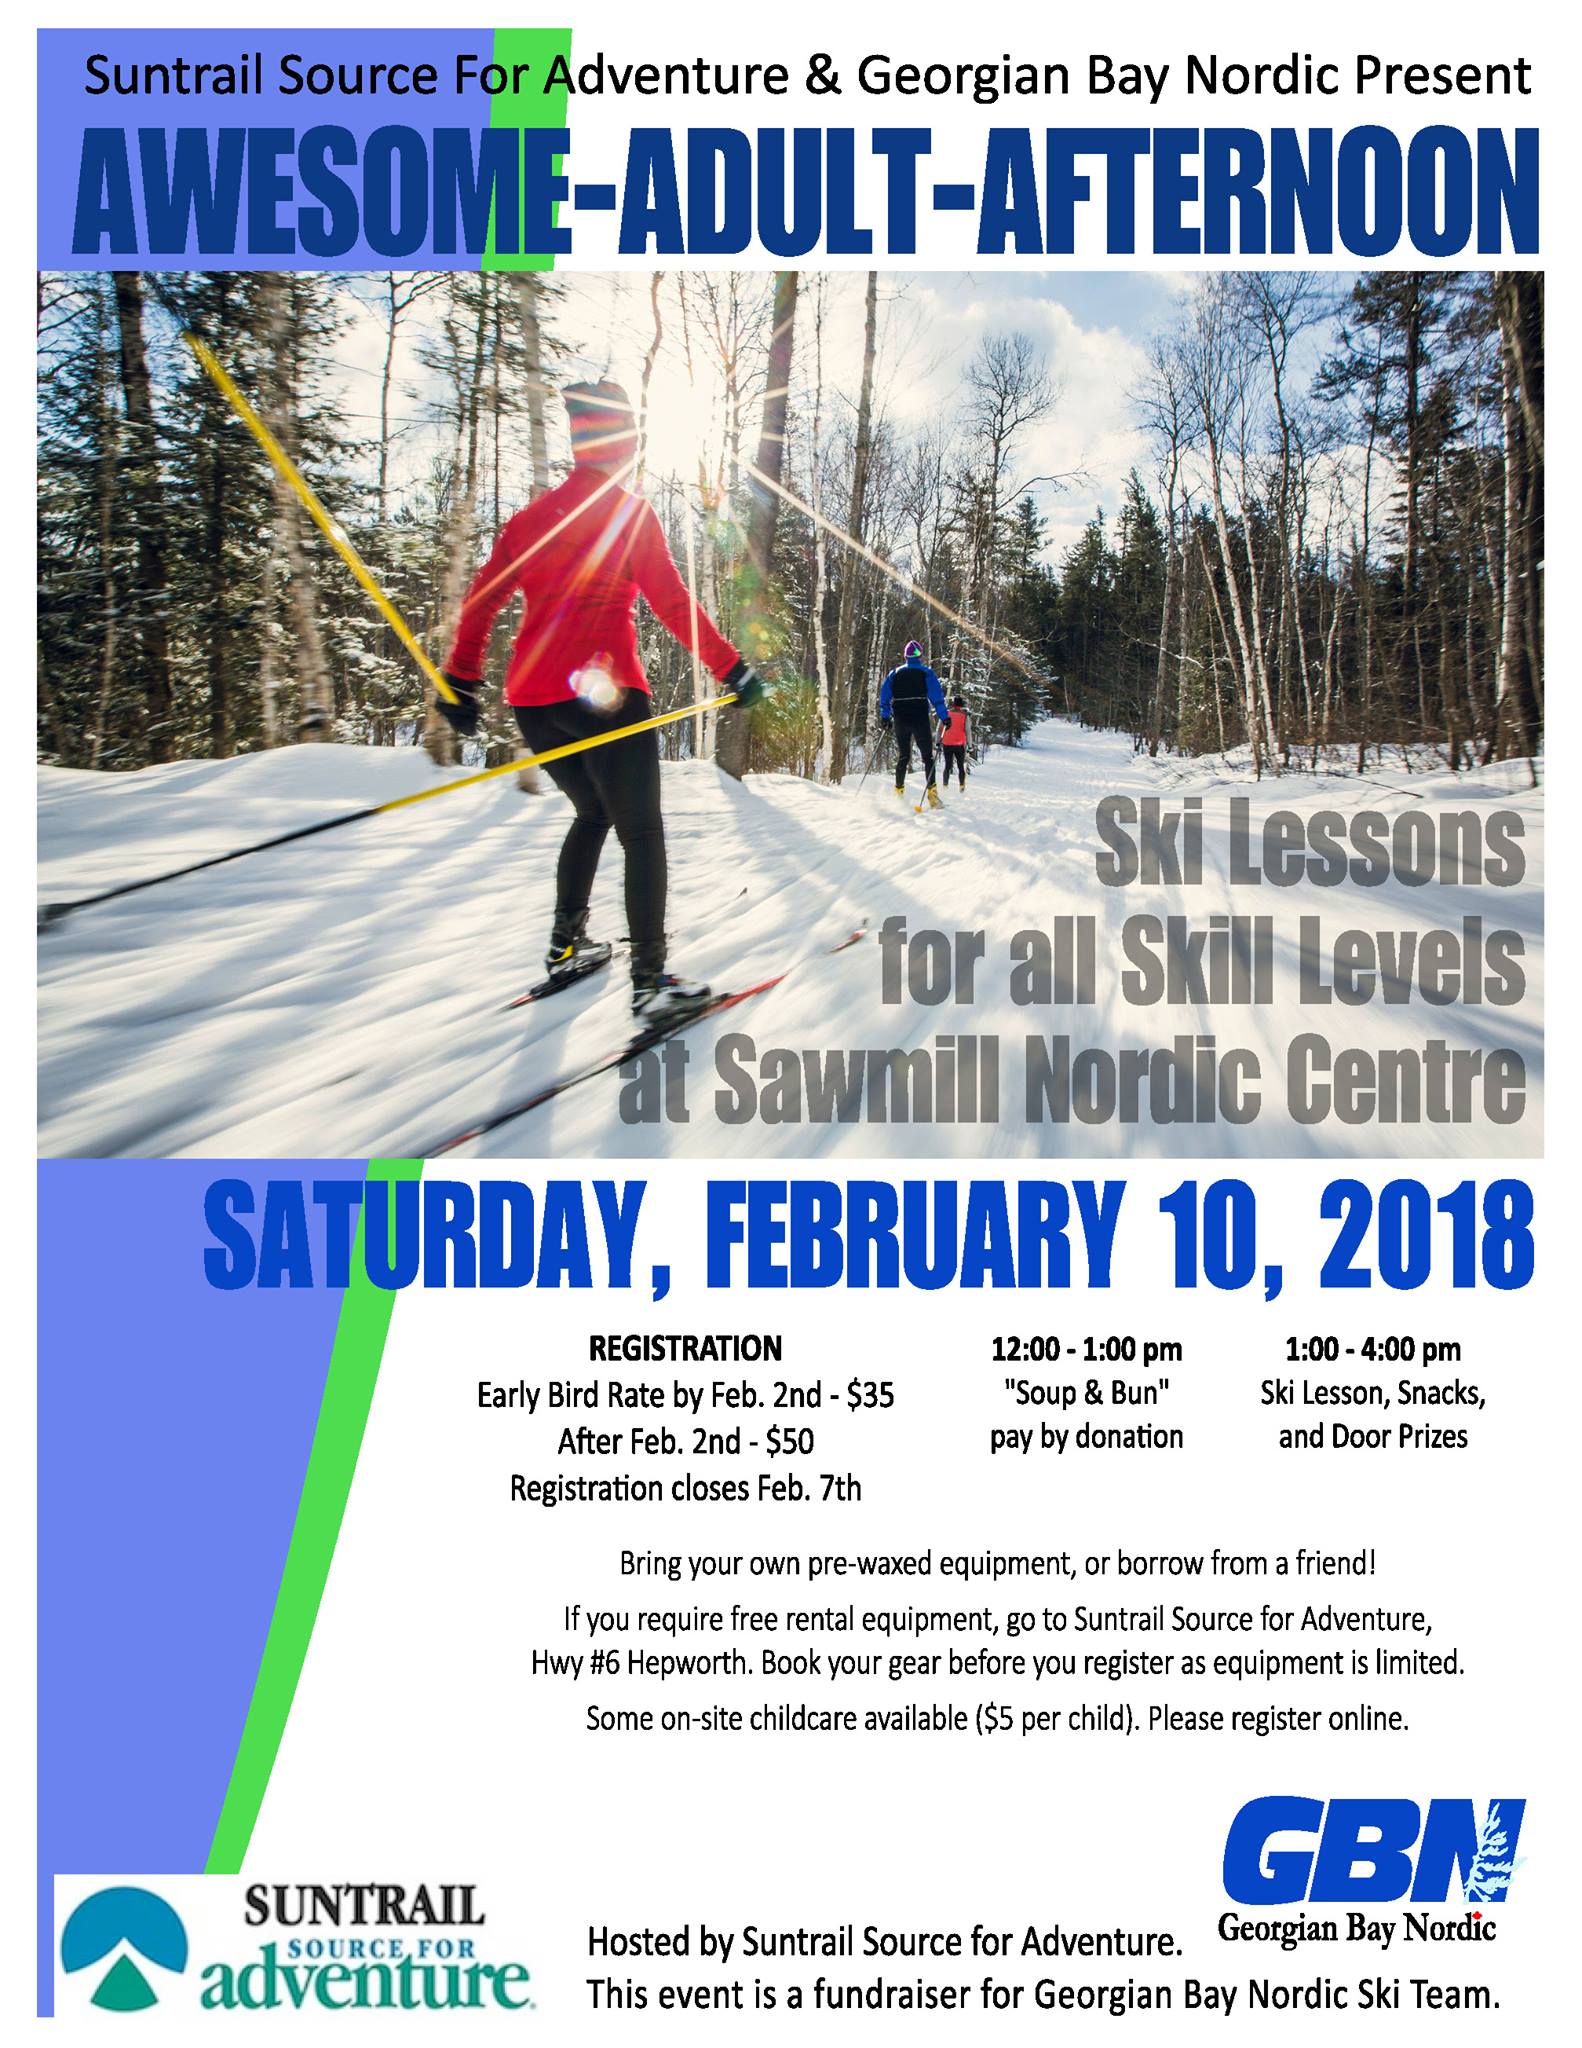 Awesome Adult Afternoon Ski Lesson 2018 poster